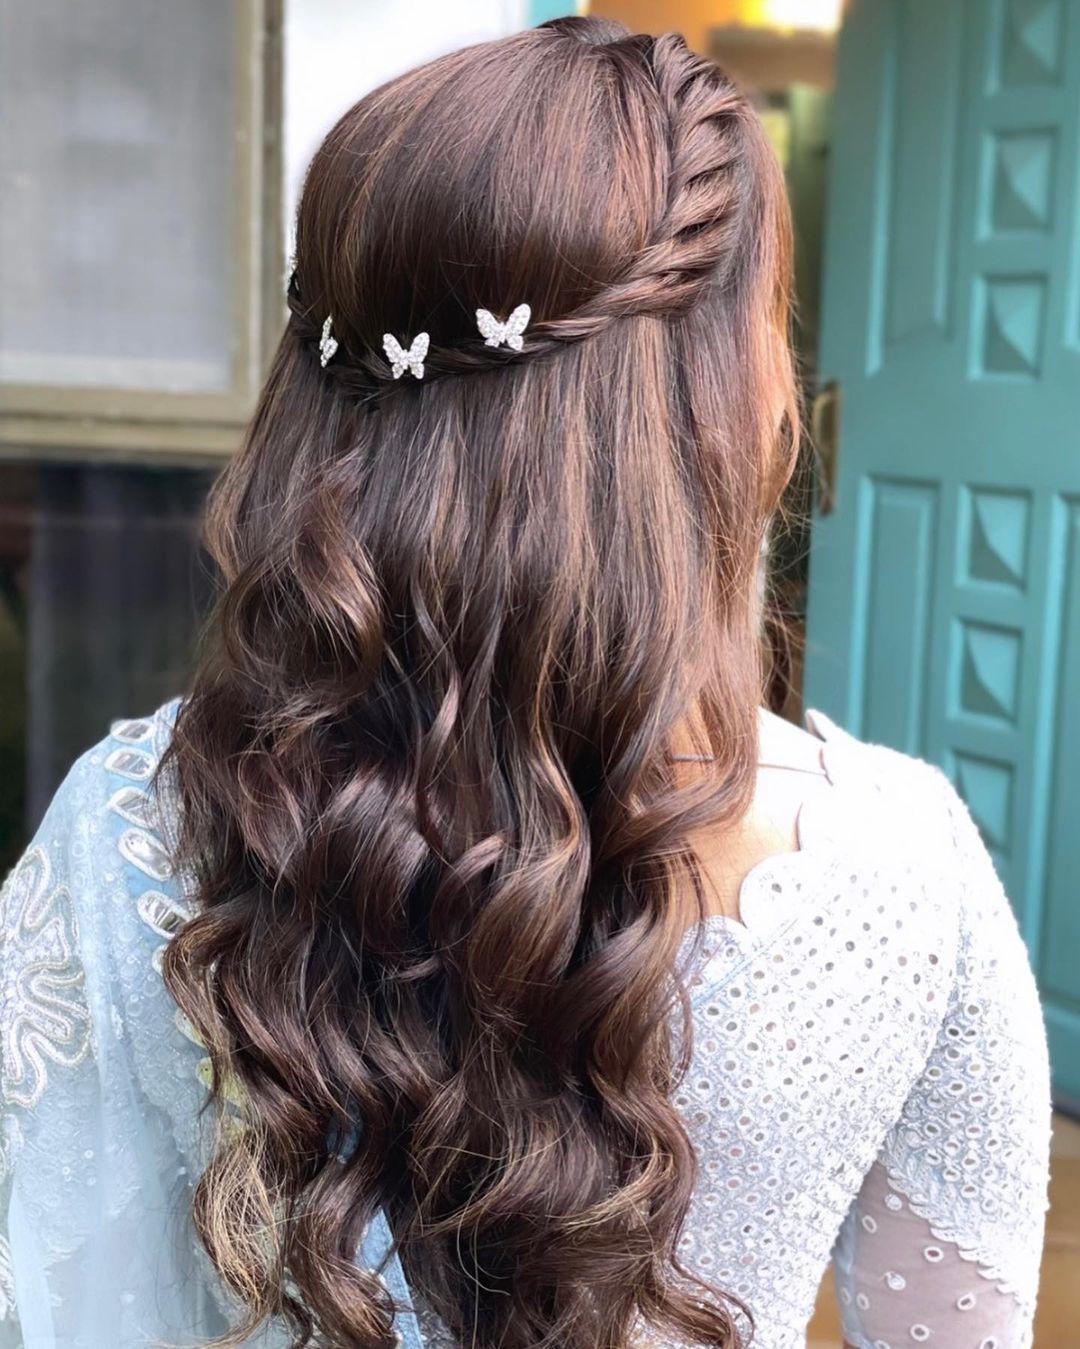 Bridal hairstyle half open – come on in style under the hood! | Avso